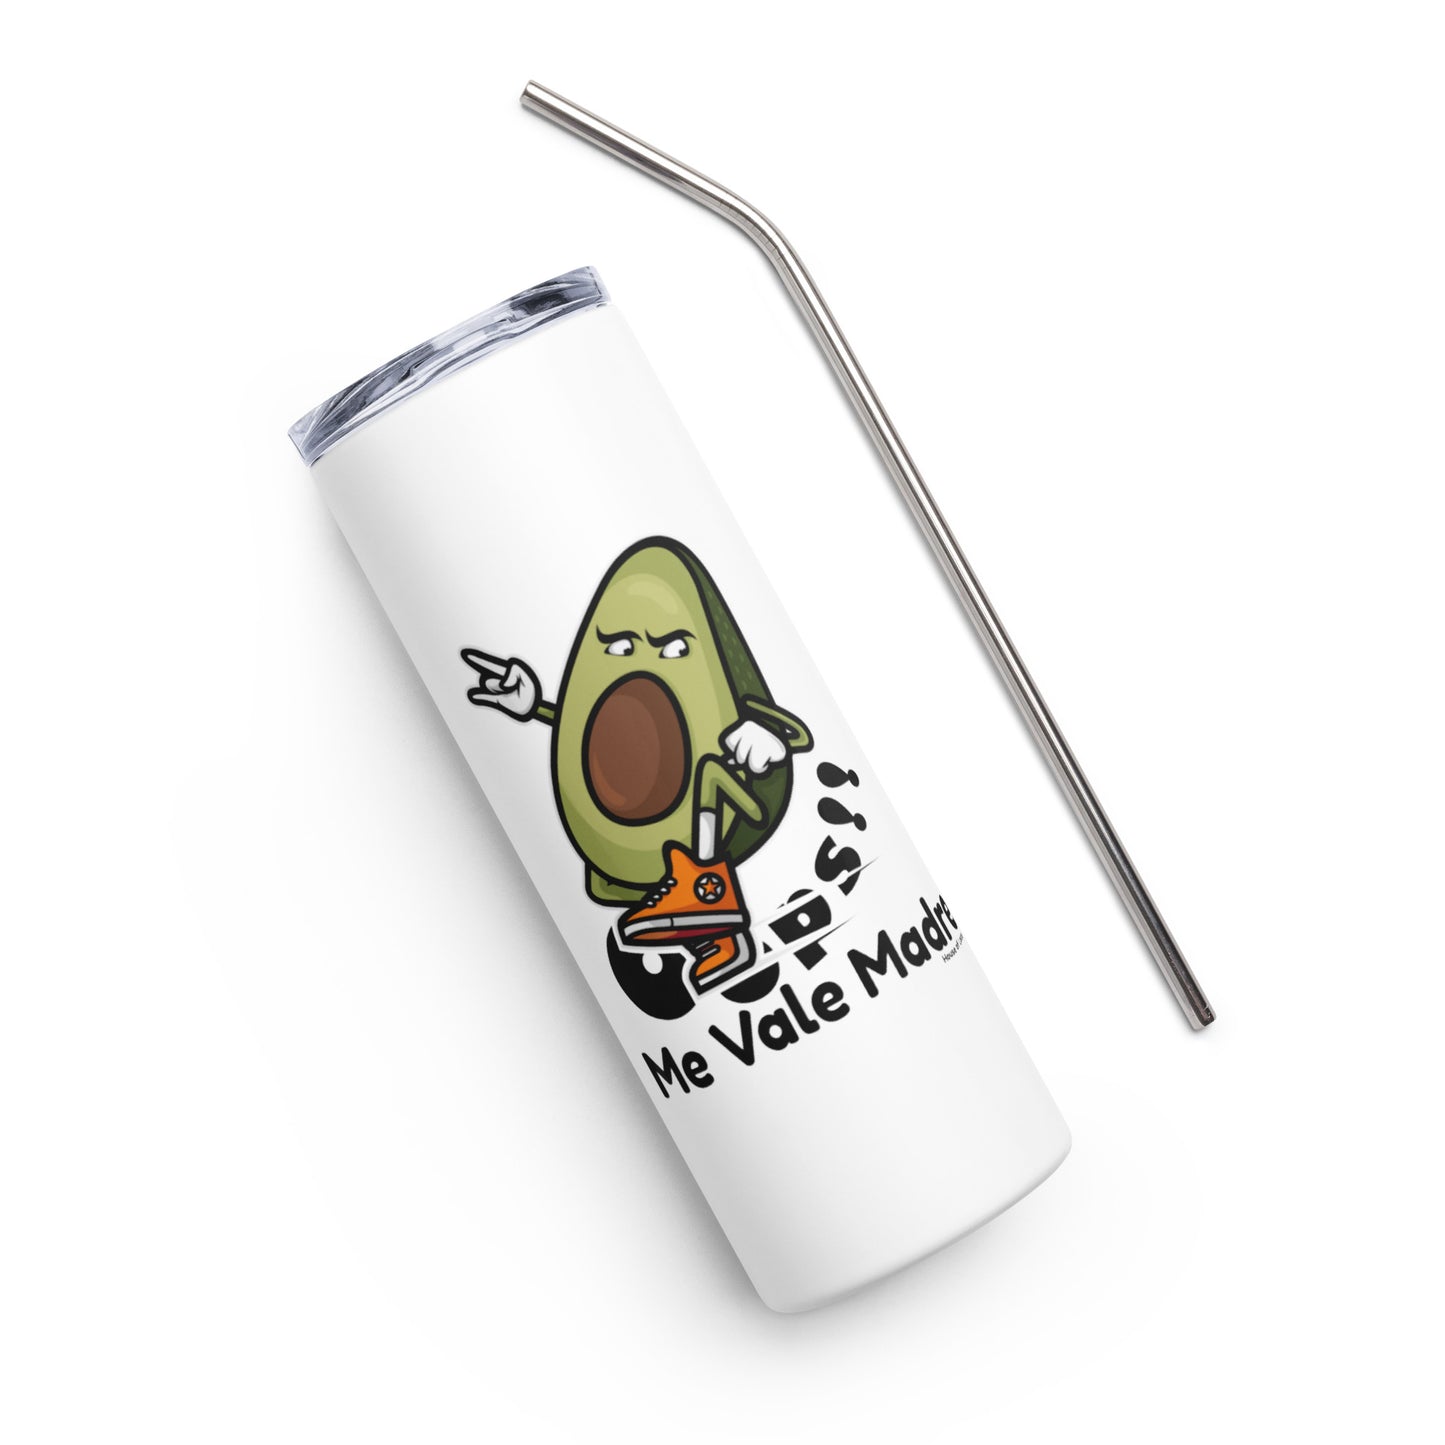 Oops Me Vale Madre Stainless Steel Tumbler 20oz